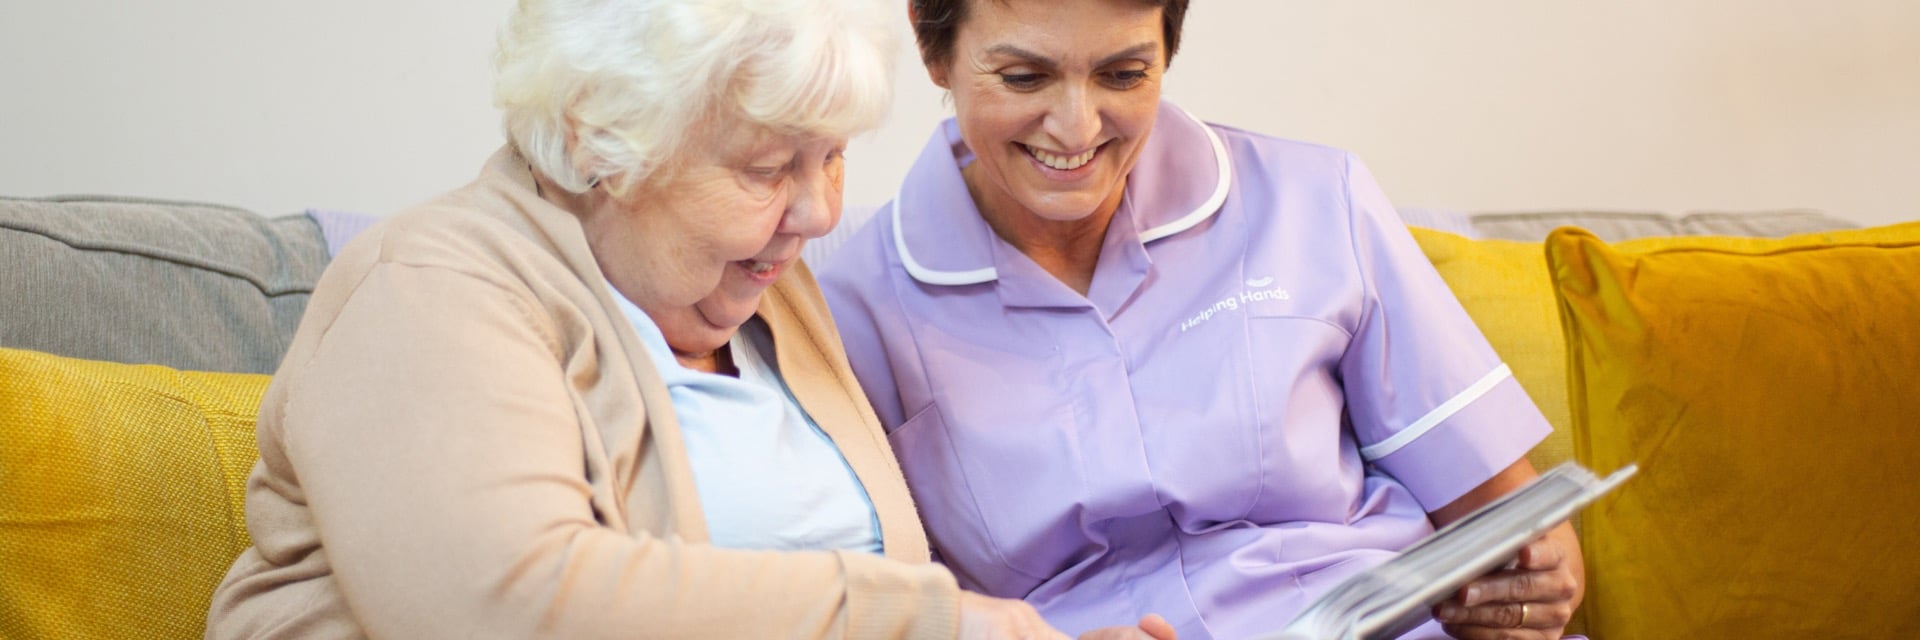 home care visits stockport